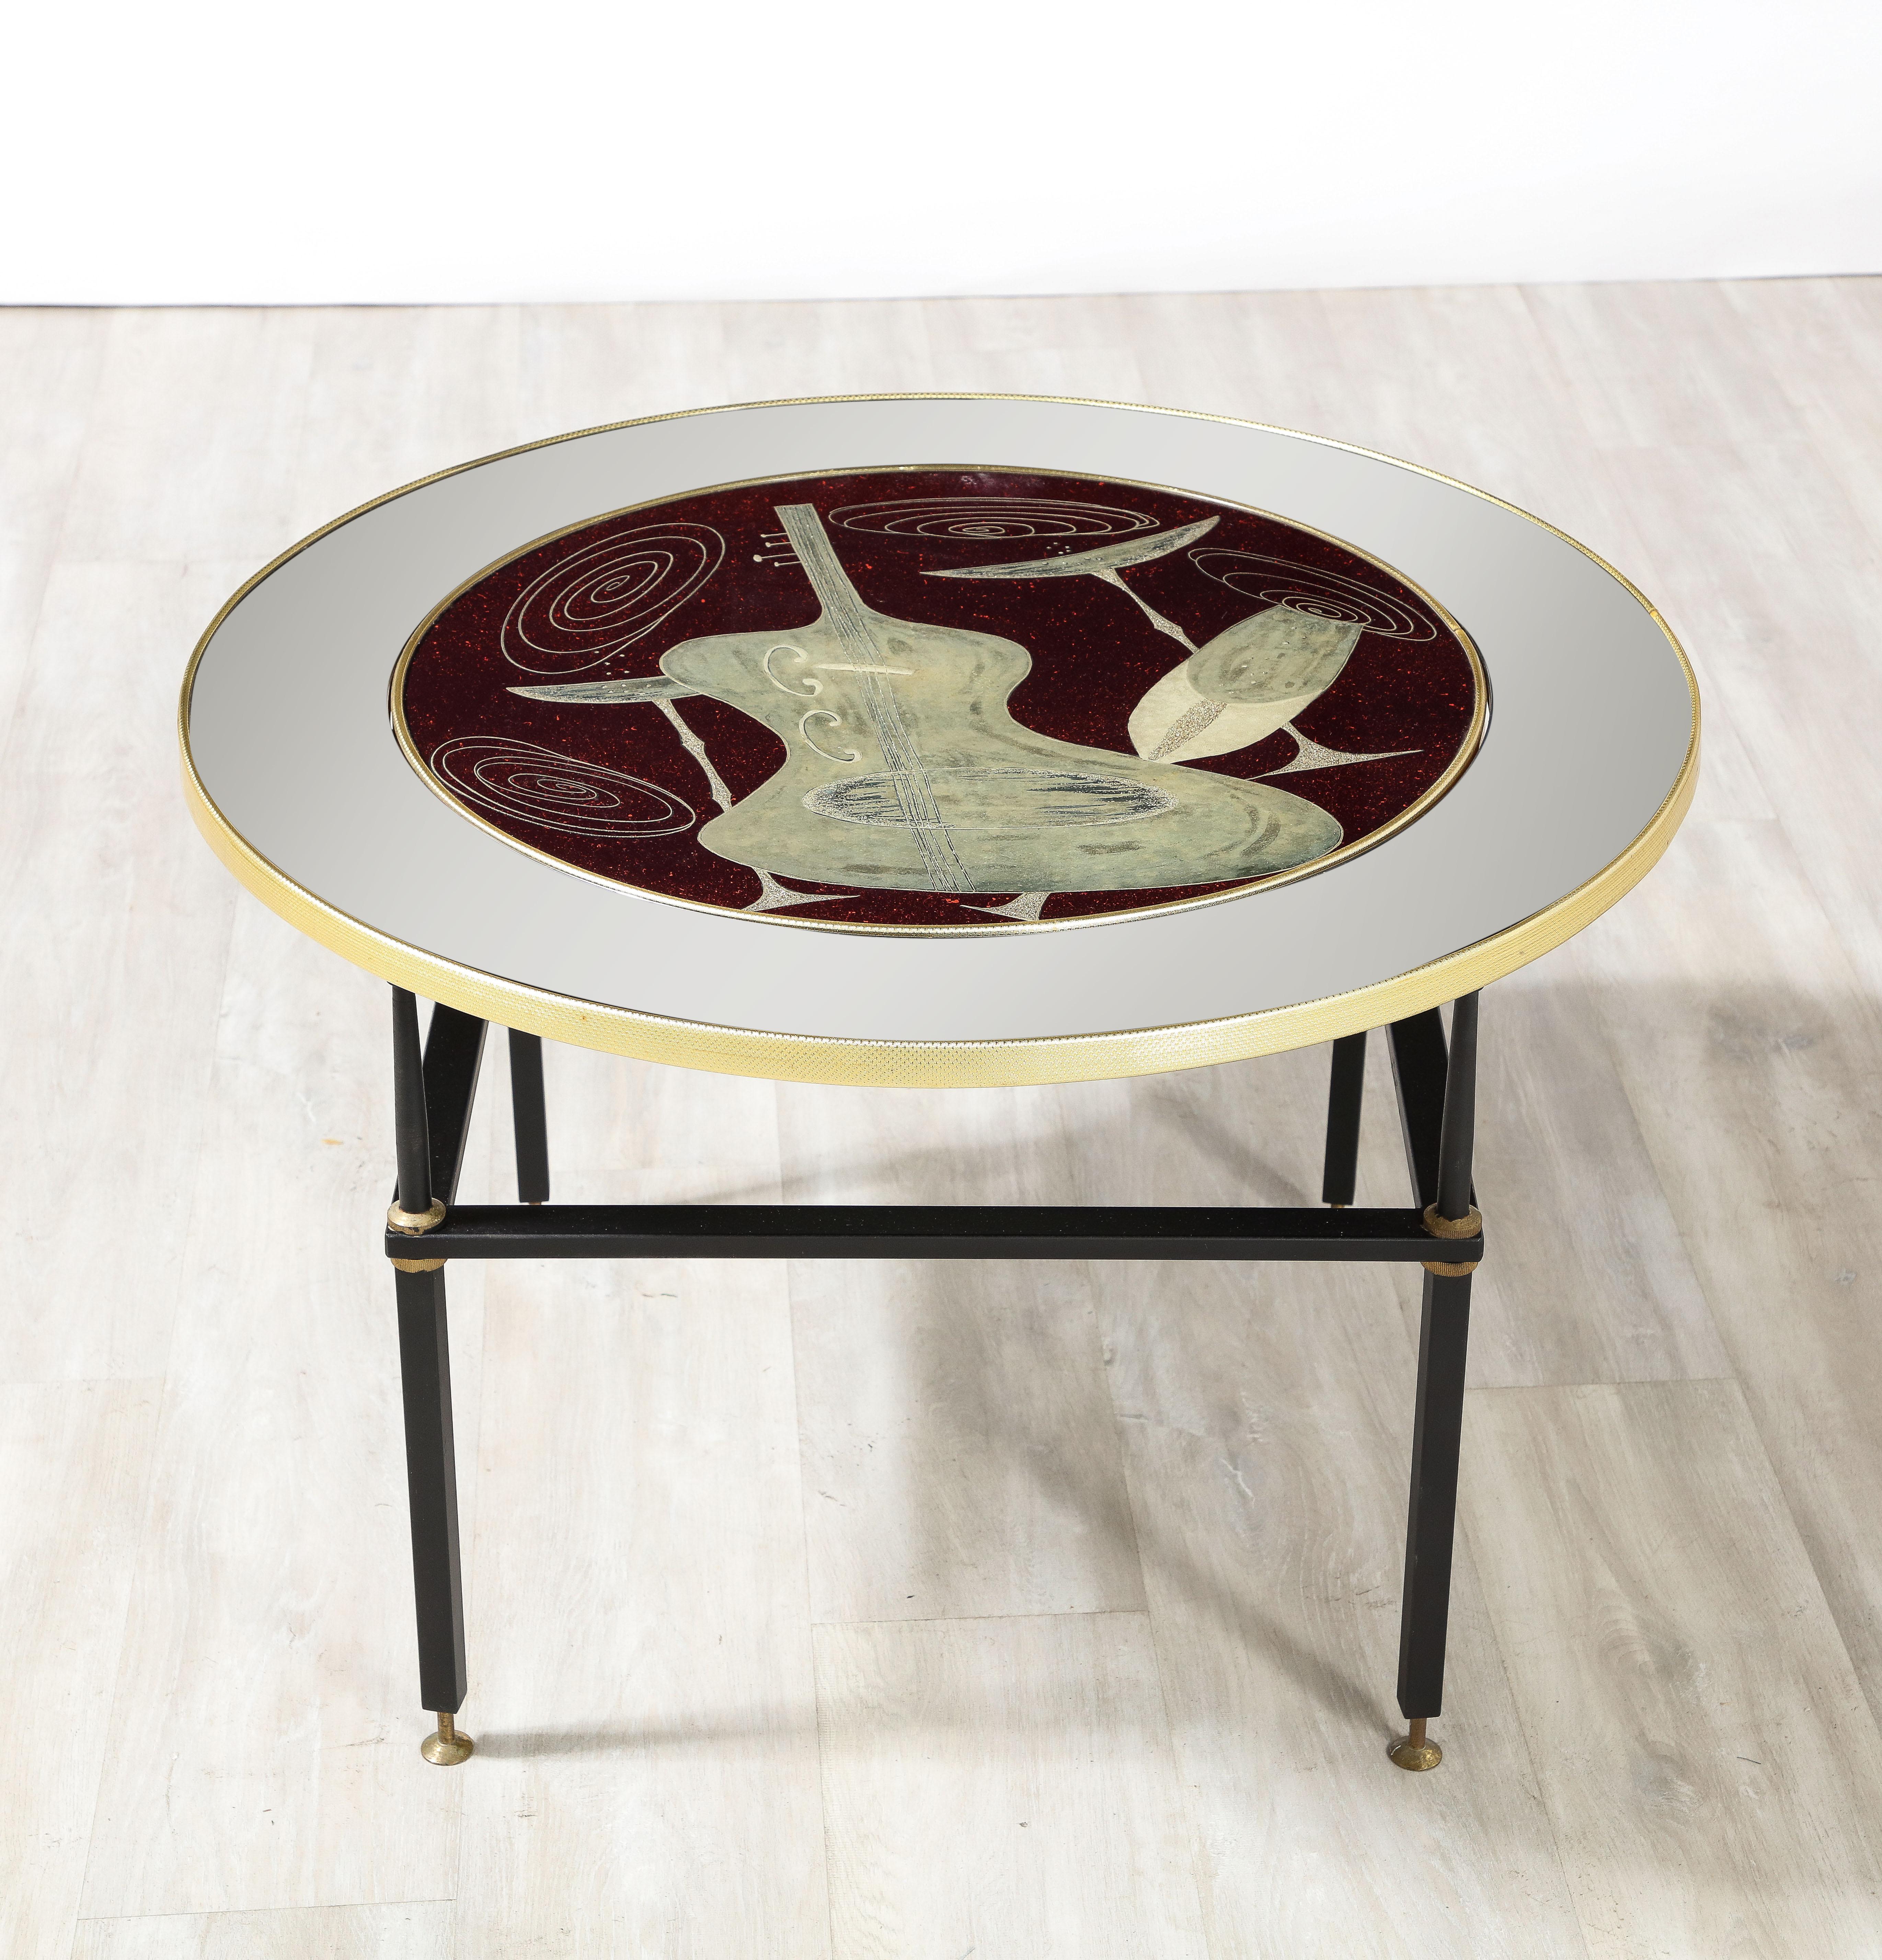 Cristal Arte Glass Table with Chess Board and Musical Motif, circa 1955 For Sale 1